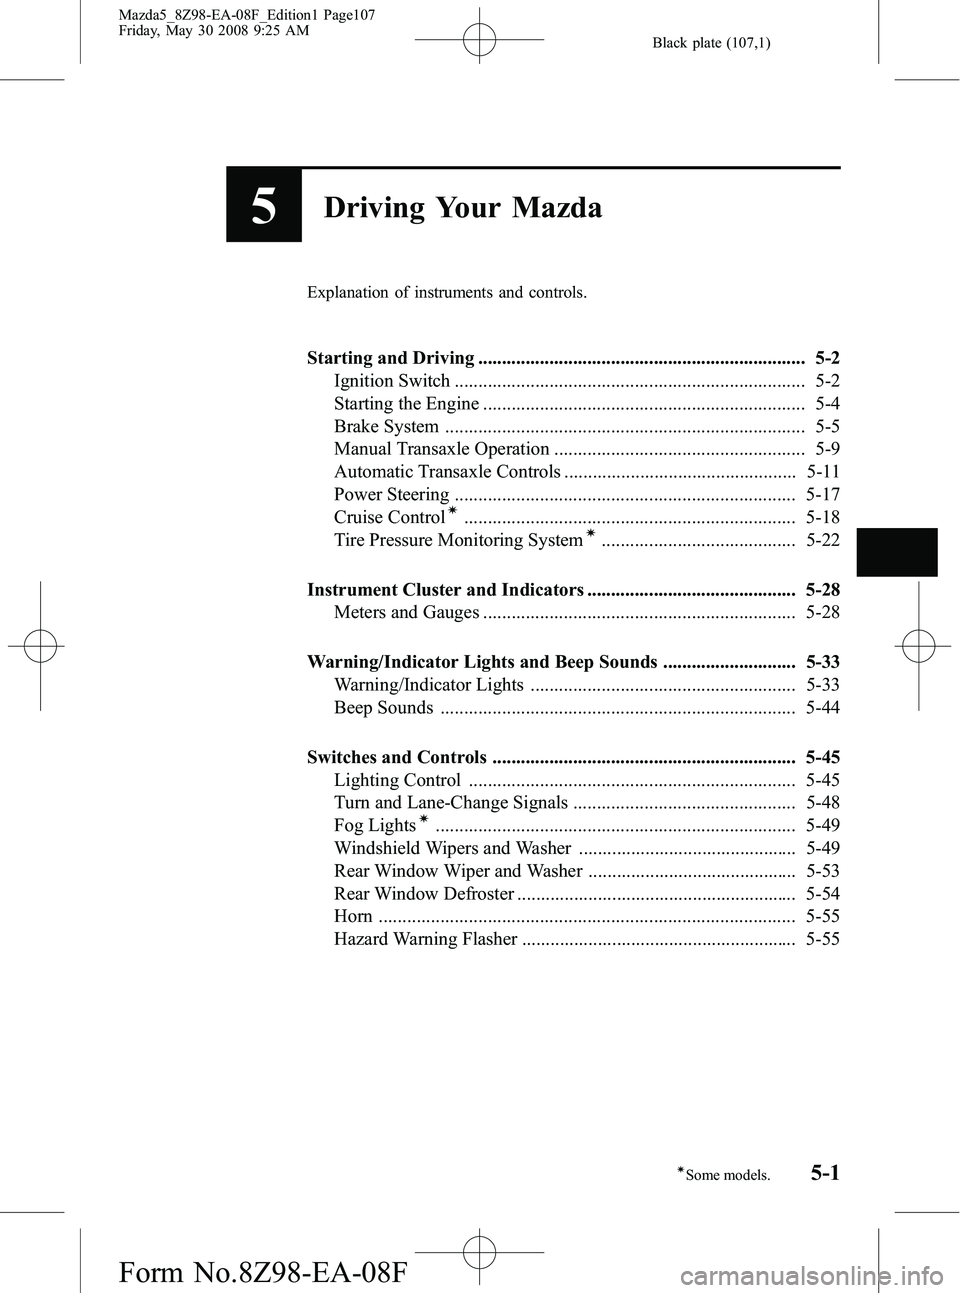 MAZDA MODEL 5 2009  Owners Manual Black plate (107,1)
5Driving Your Mazda
Explanation of instruments and controls.
Starting and Driving ..................................................................... 5-2Ignition Switch .........